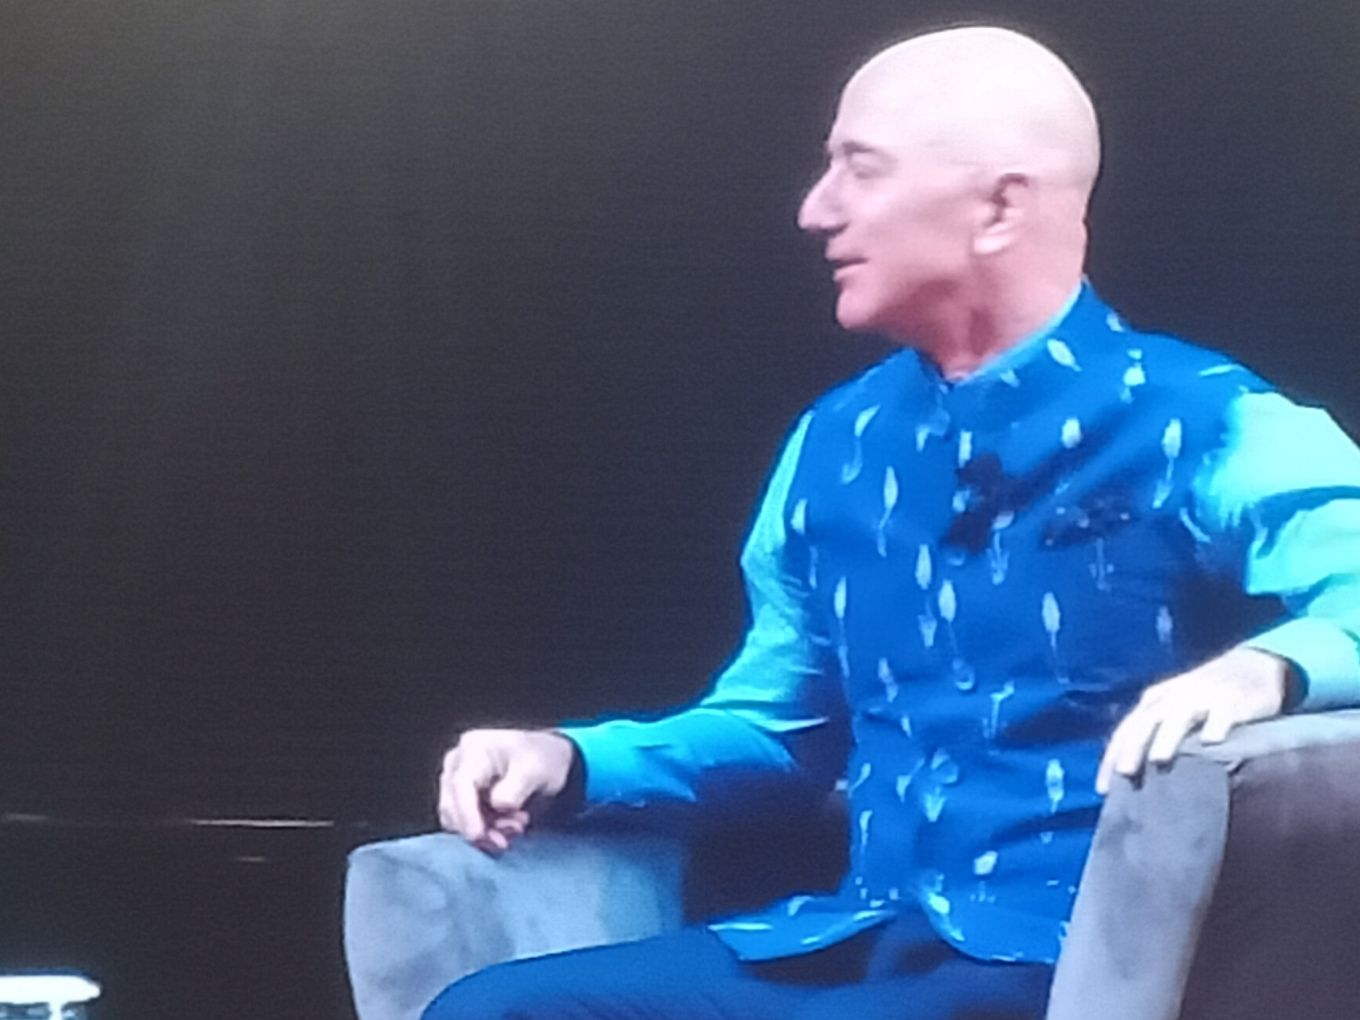 Jeff Bezos Applauds India’s Dynamism & Energy, Says Will Rule 21st CE